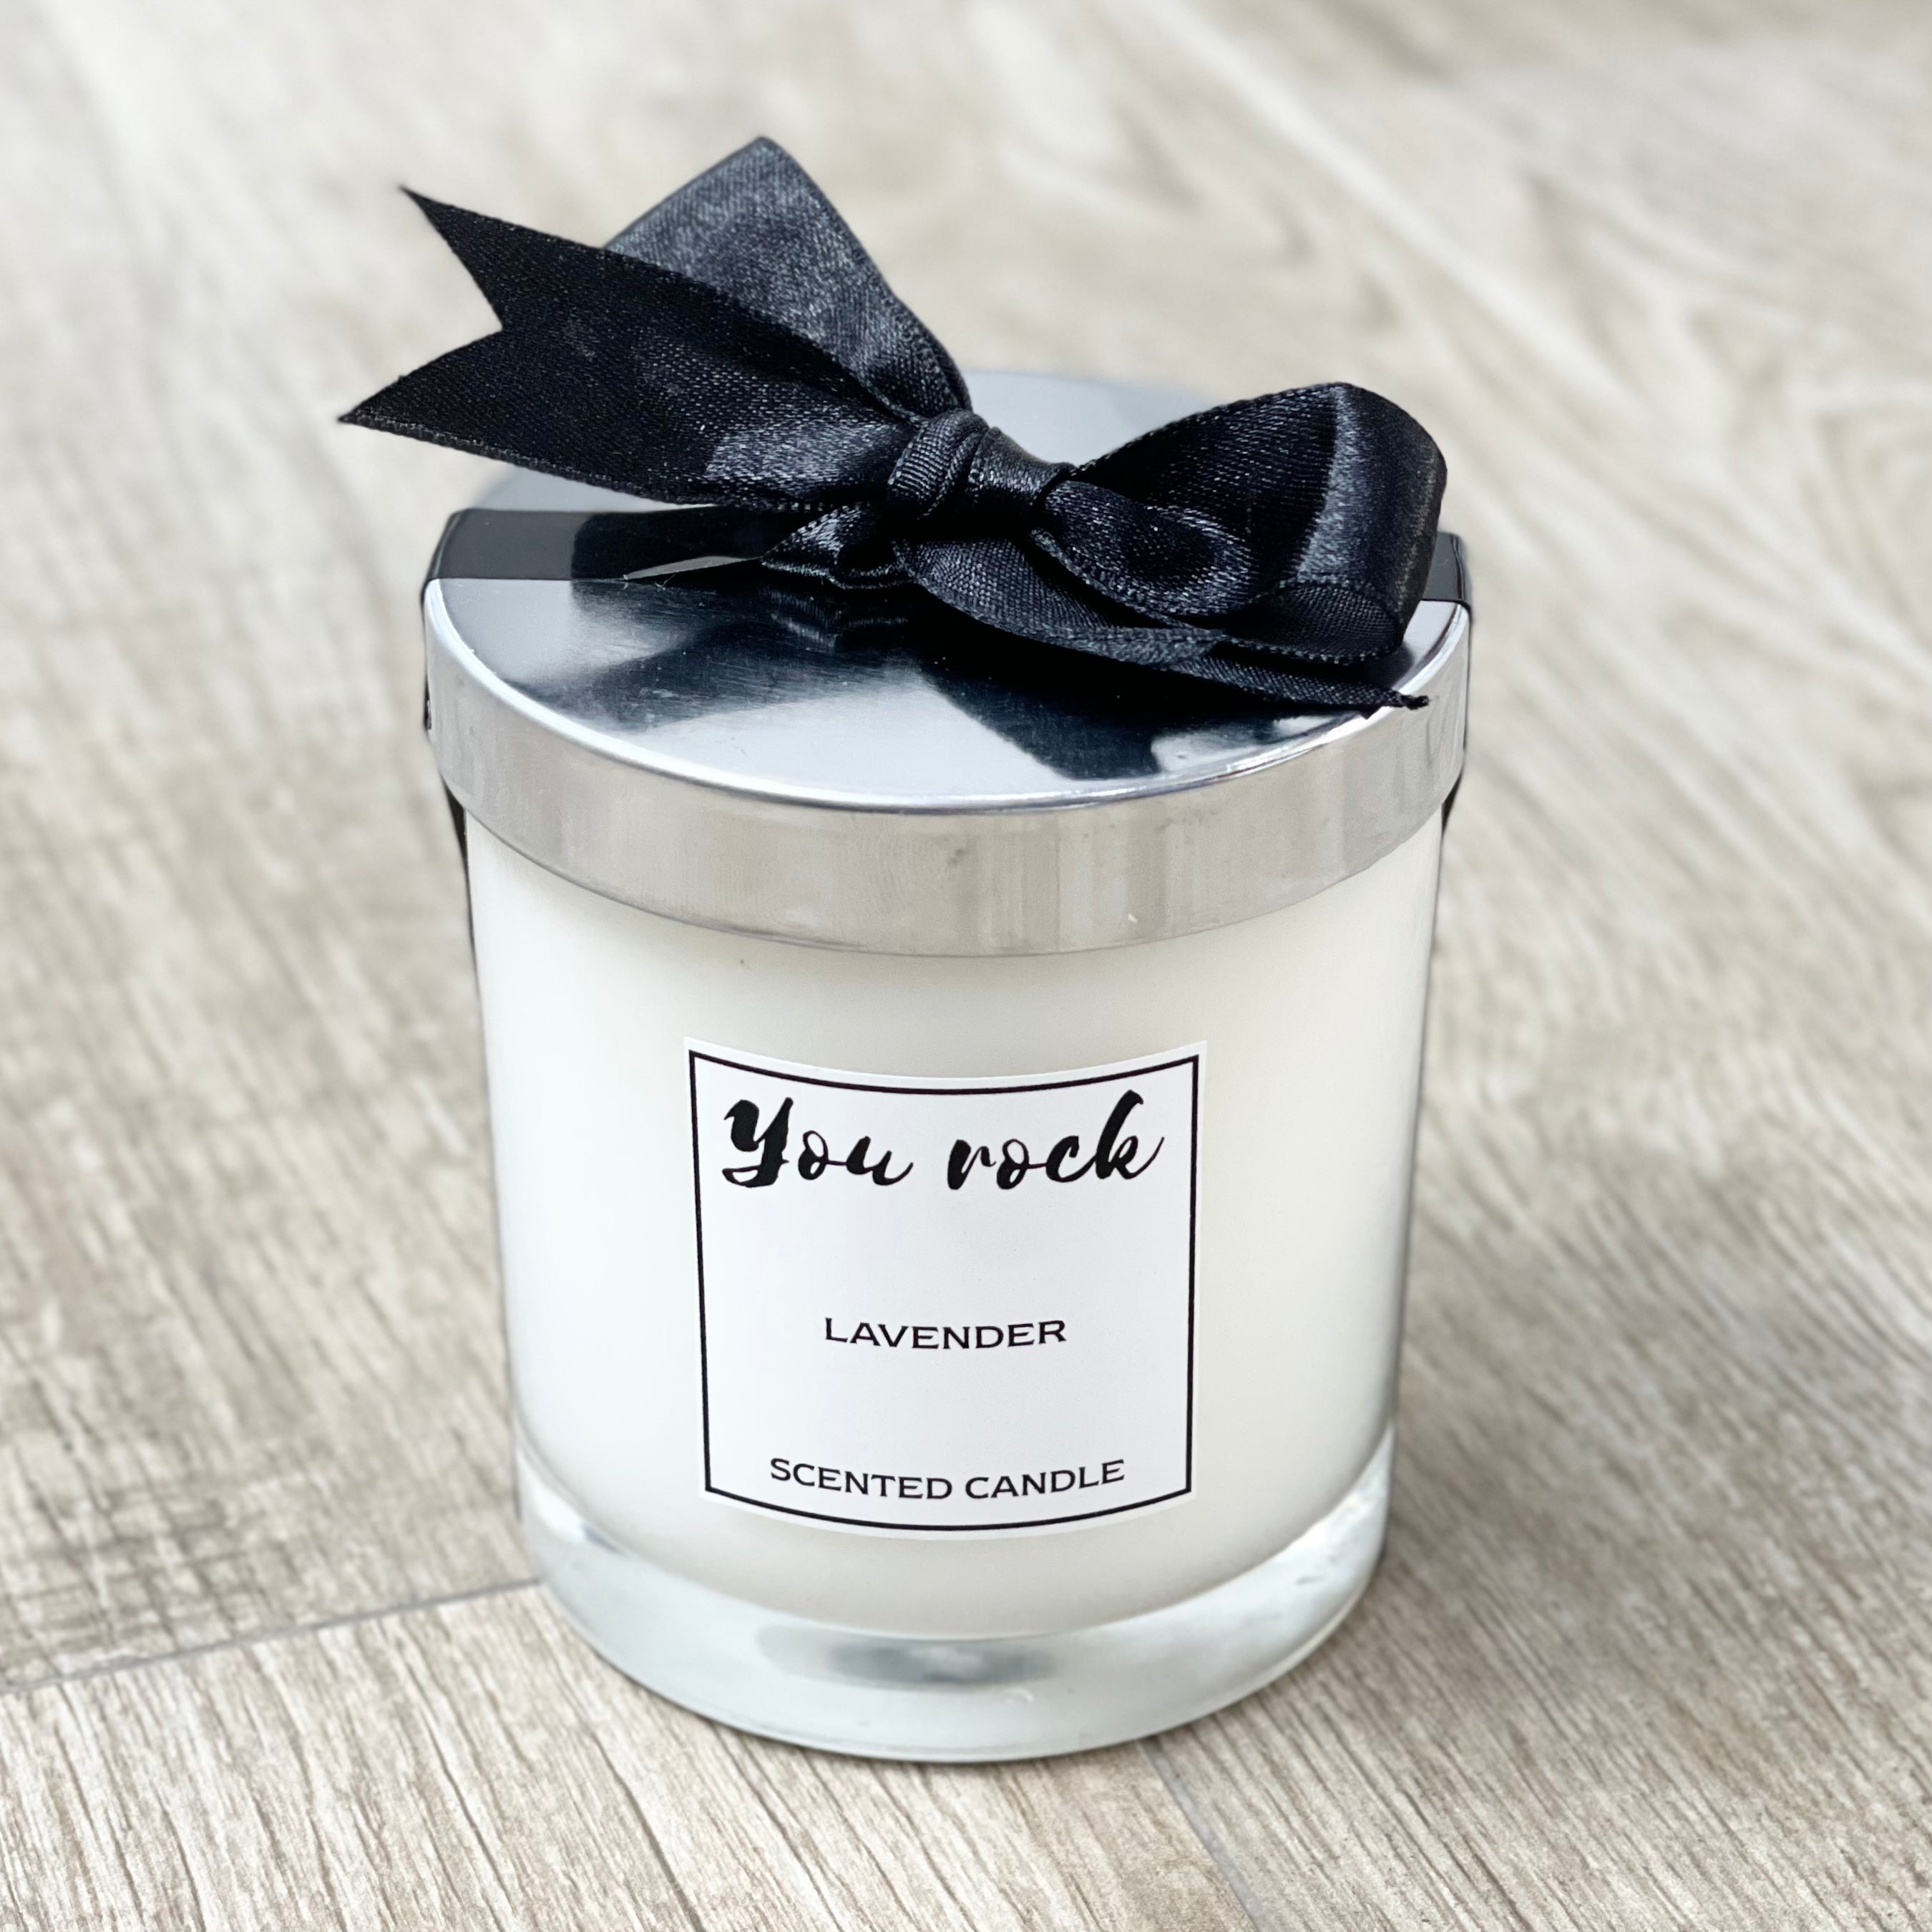 Signature Soy Wax Scented Candle - You Rock Dubai